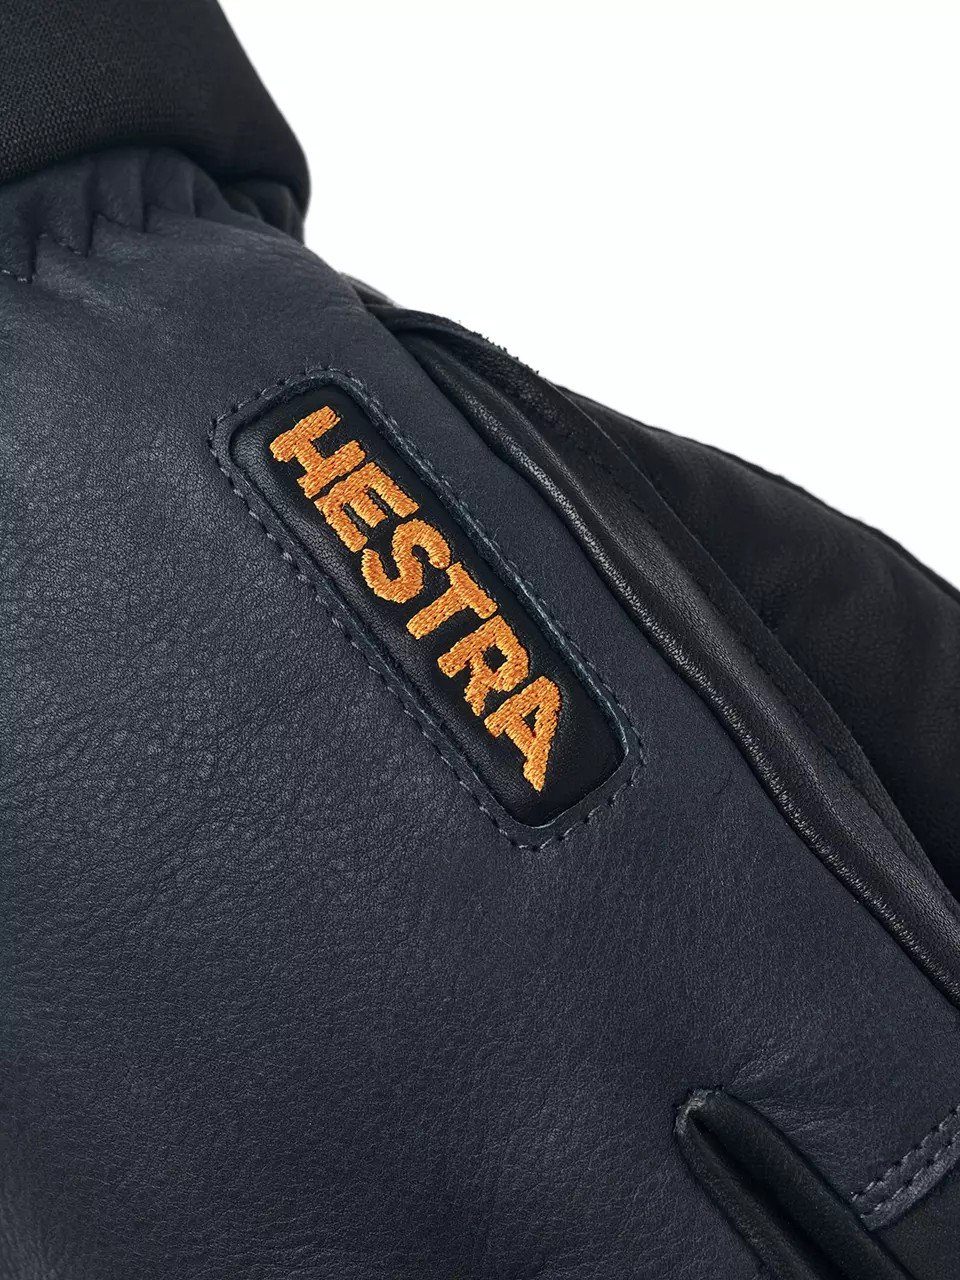 leather wool - 5 terry Hestra Multisporthandschuhe Army finger